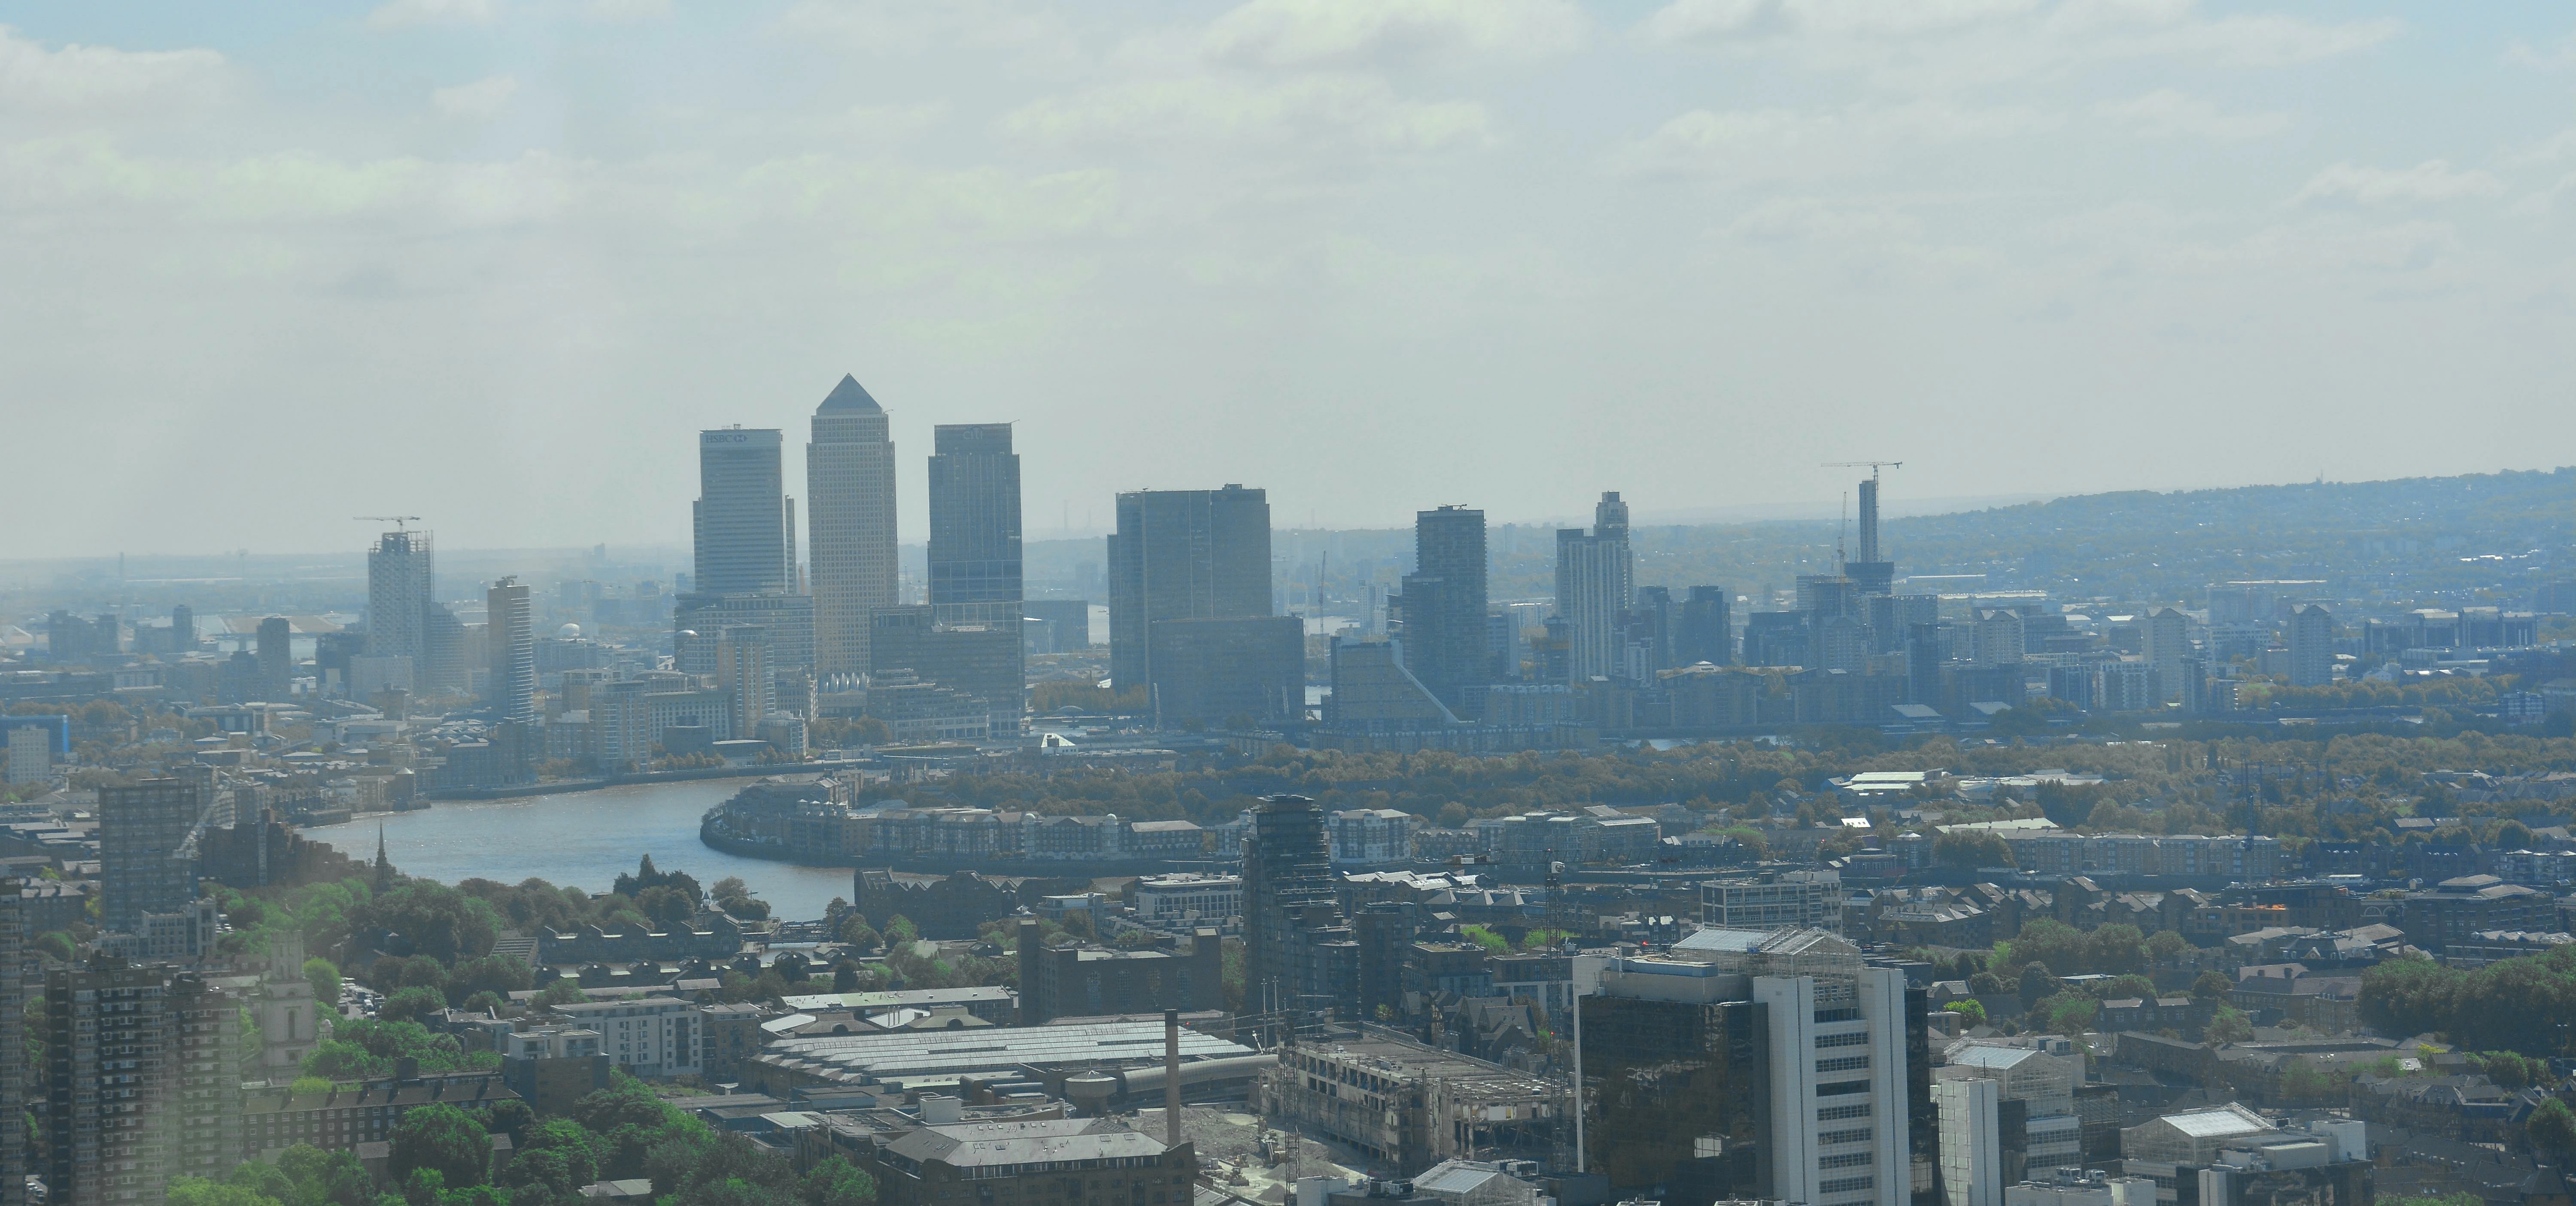 London 26-5-2015, London, 20 Fenchurch Street "The Walkie Talkie Building", The View From The Sky Ga